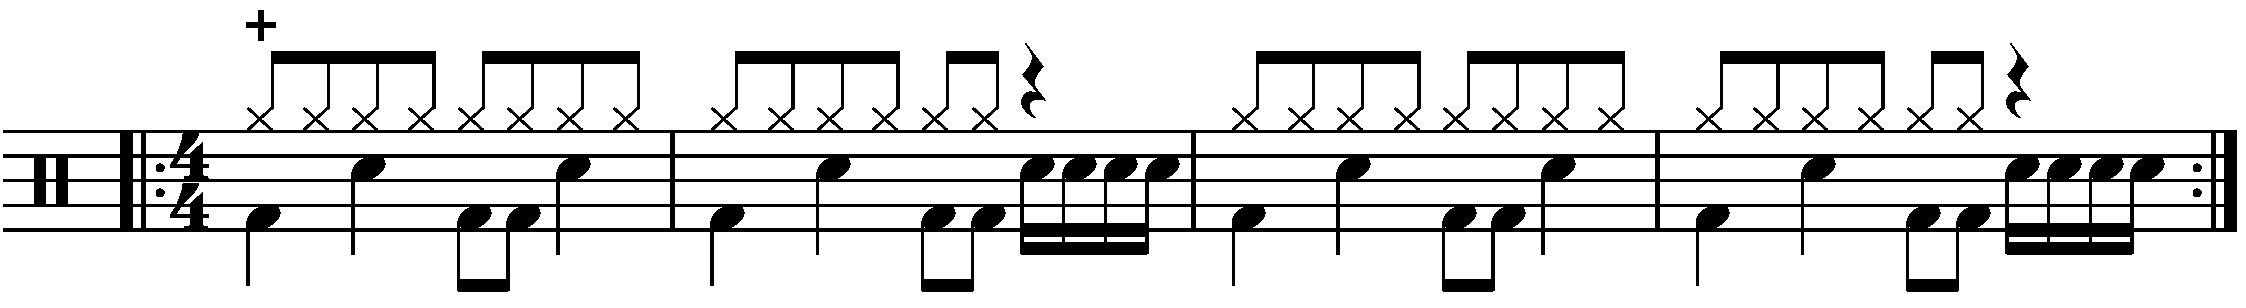 A repeated two bar phrase using sixteenth note fills.